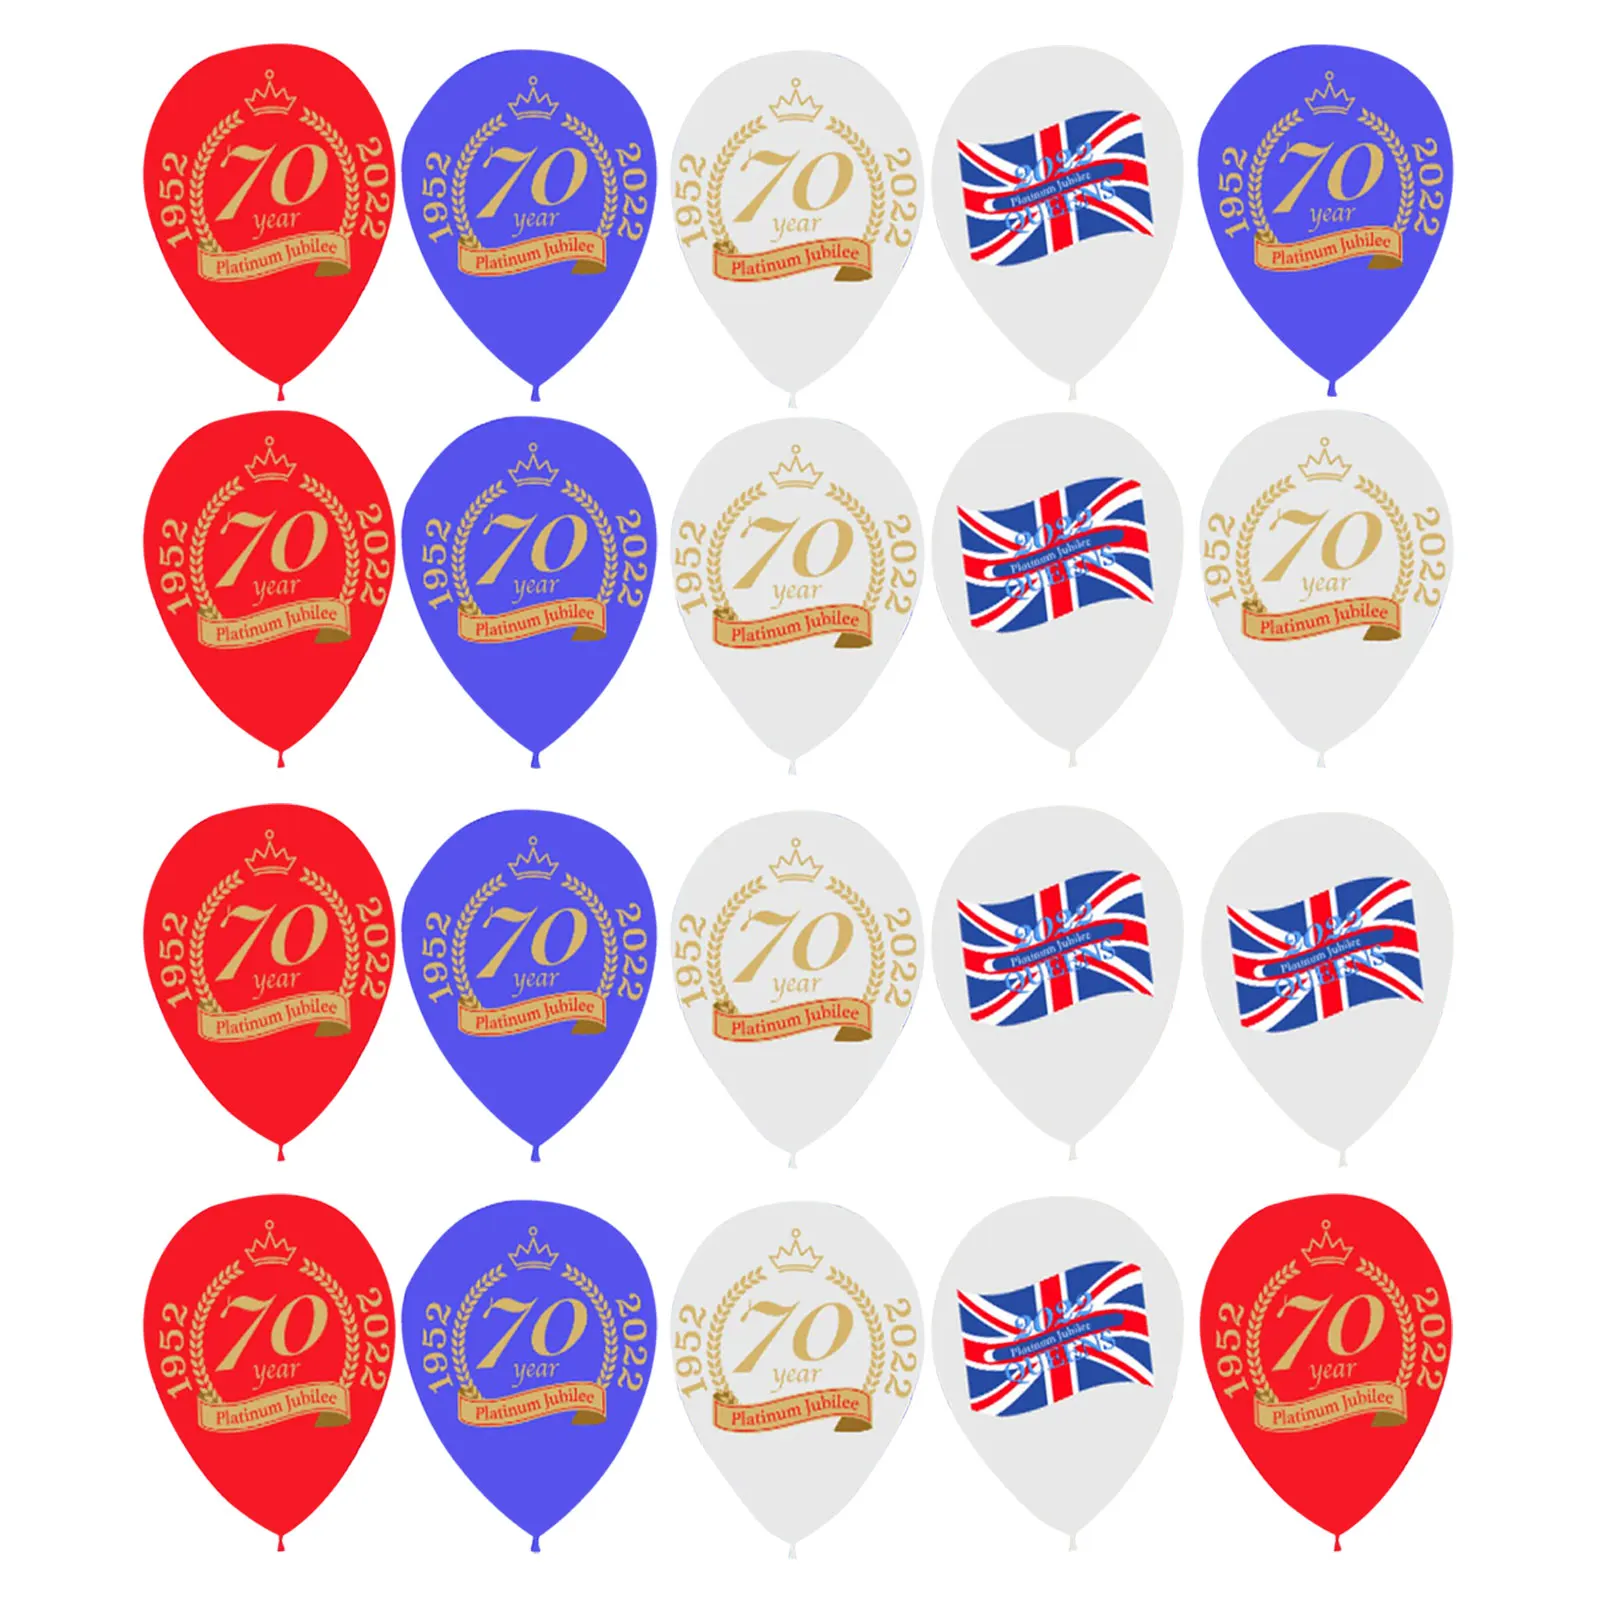 

70th Queen's Jubilee Balloons Set Patriotic Party Decoration For Queen's 70th Jubilee Great Britain Union Jack Flag British Part